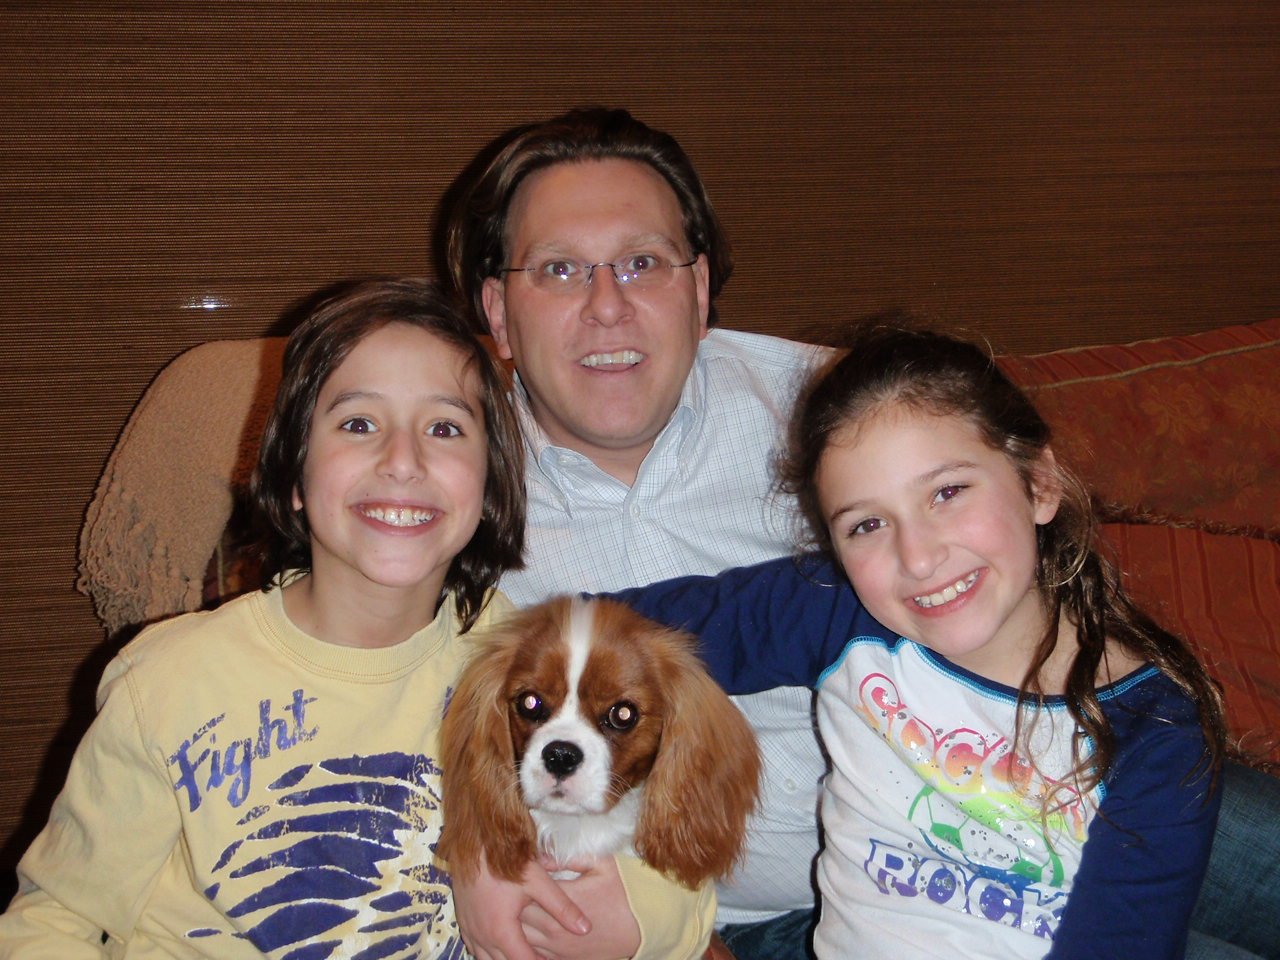 Me with Alex and Rylie Frieder as well as their dog Baxter.  